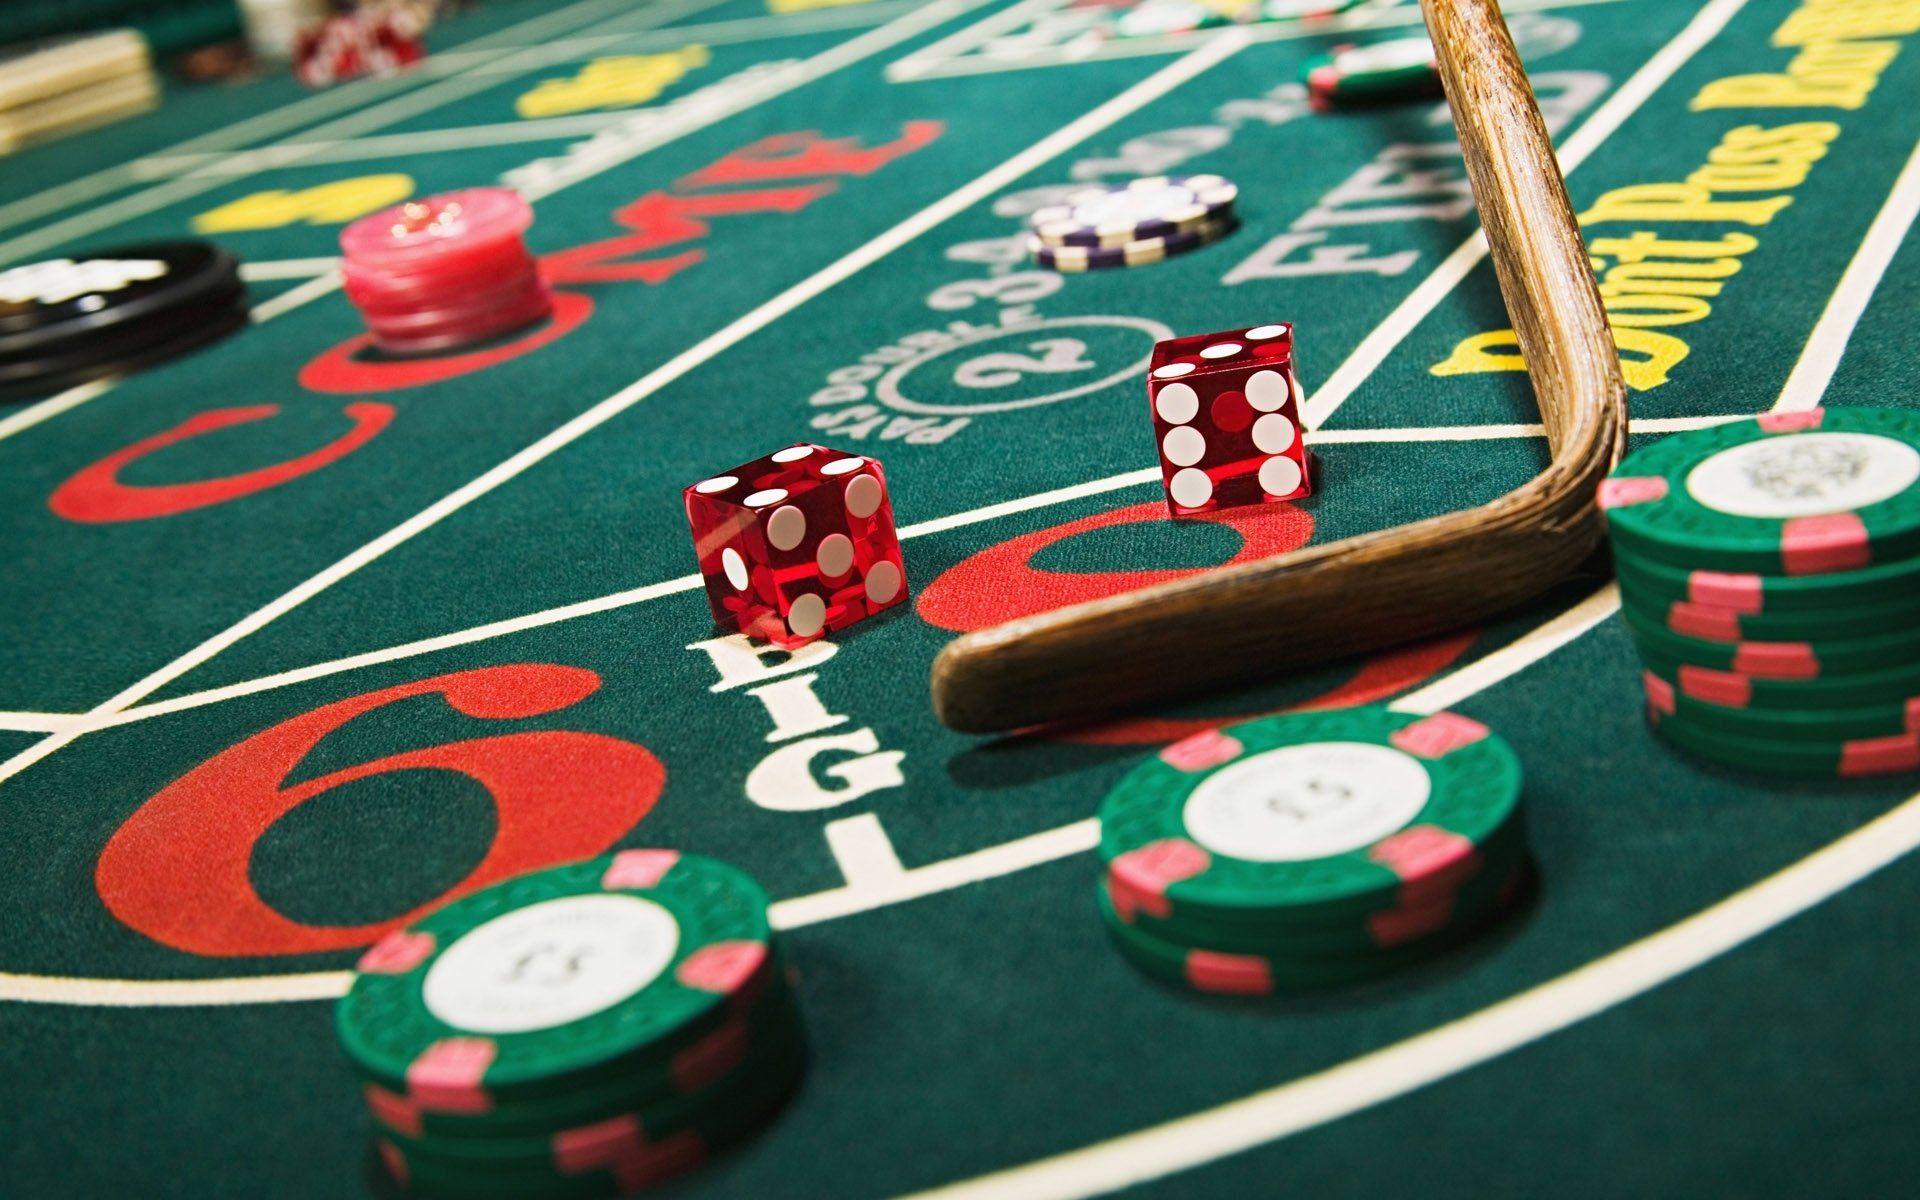 Everyone should be encouraged to play at a casino online